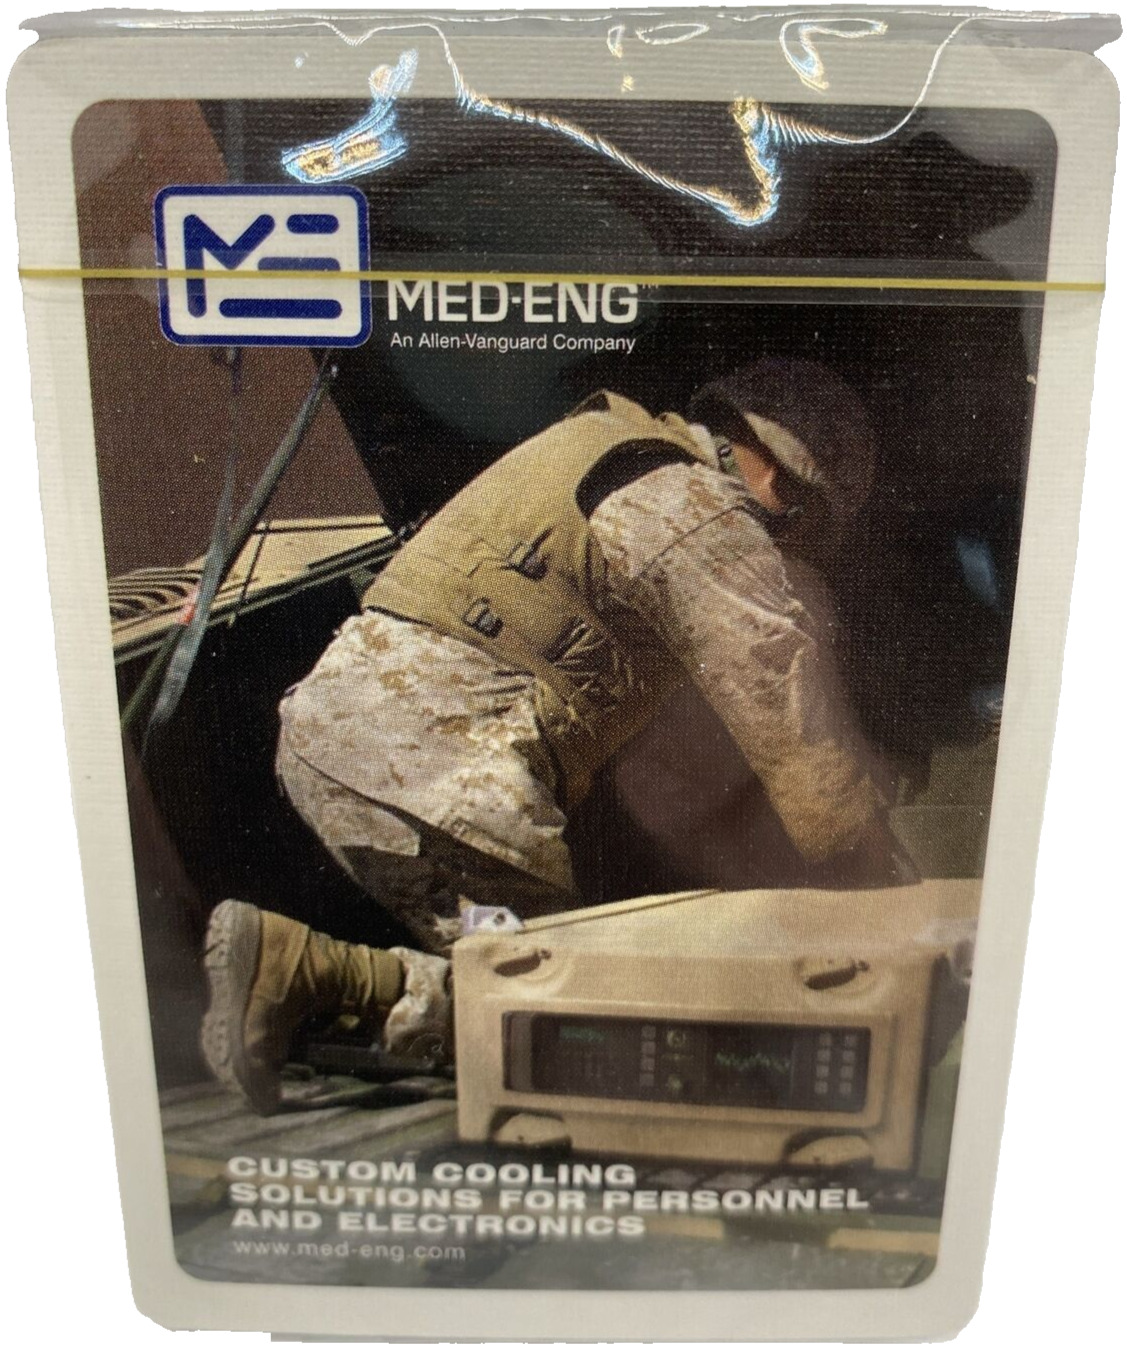 Med-Eng Deck Playing Cards Graphica Bomb Protection Robots Advertising Sealed